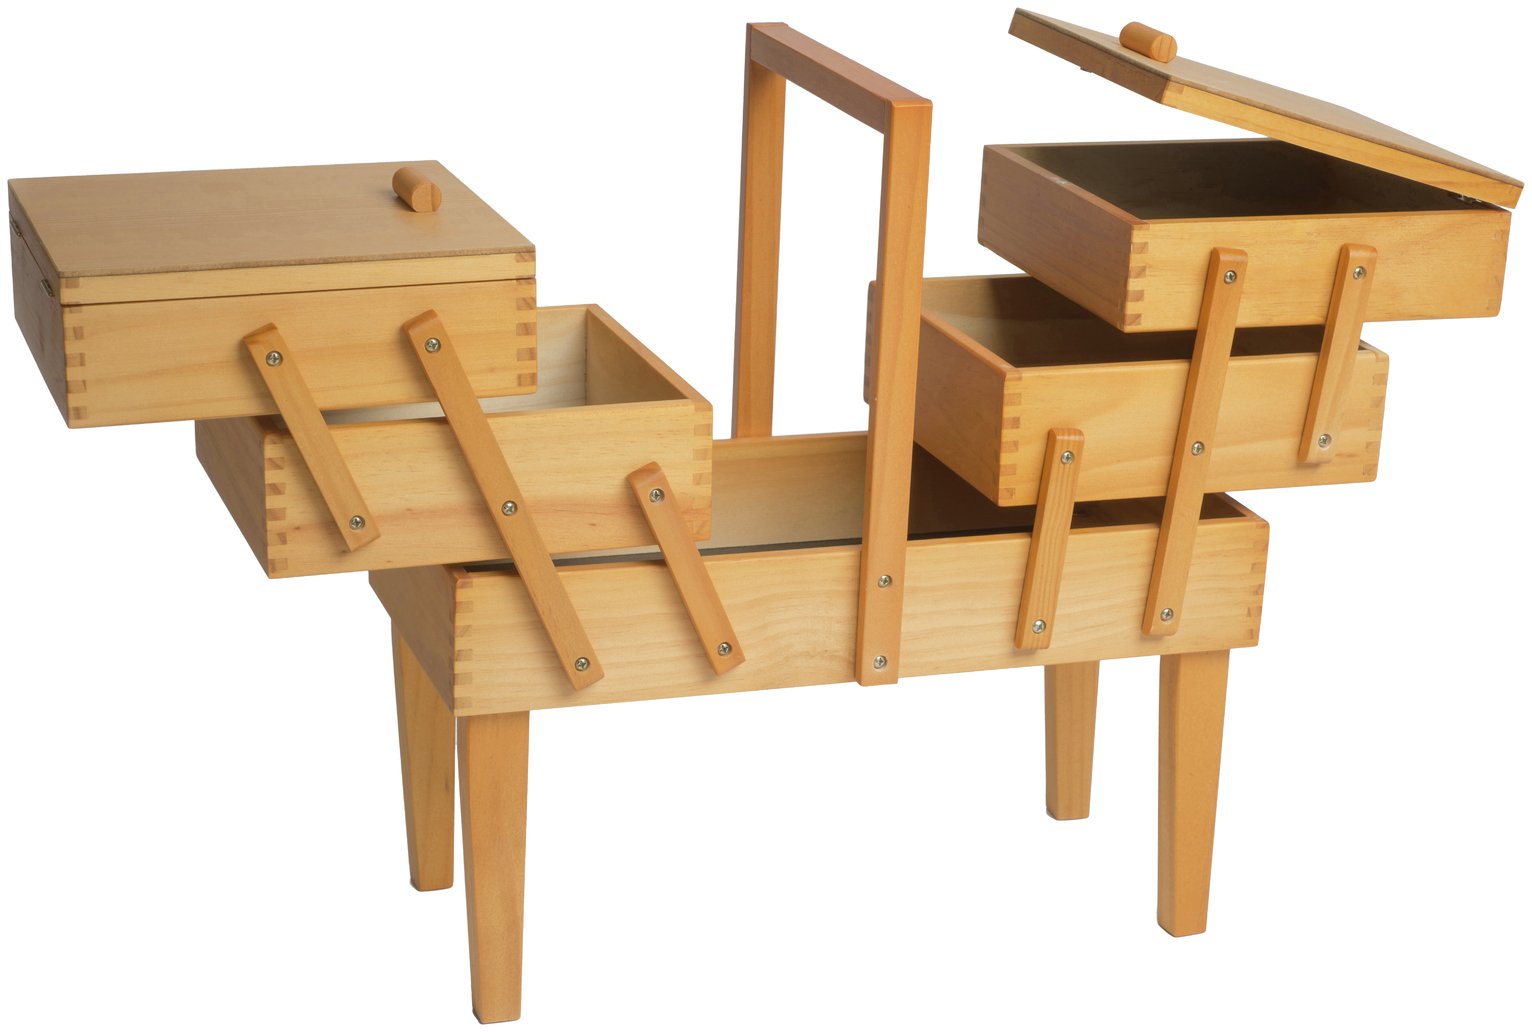 Hobby Gift Cantilever Sewing Box - Beech Wood